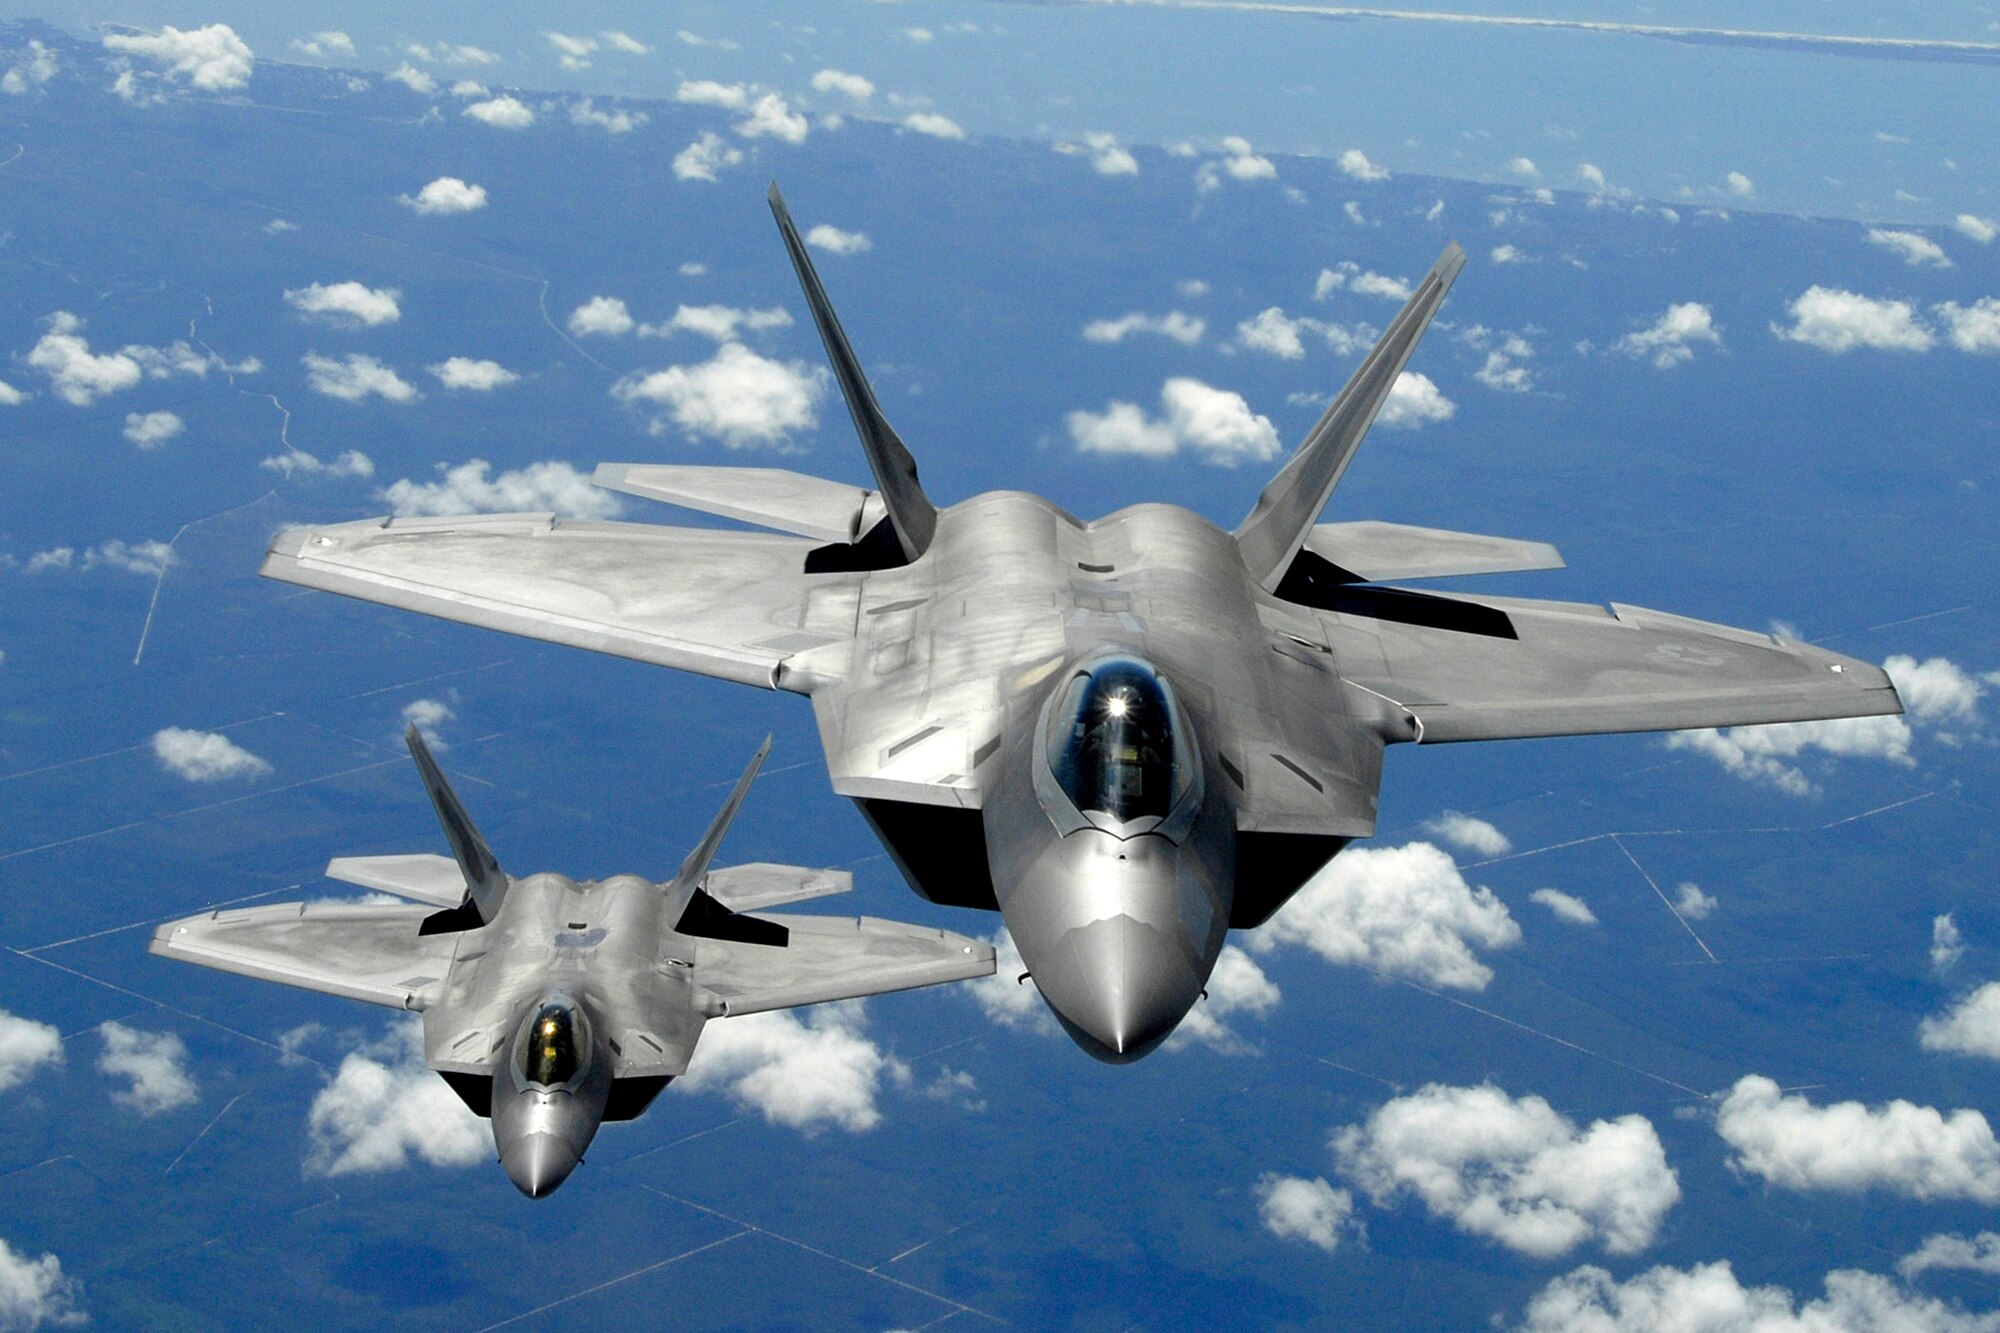 Two F-22 Raptors from Tyndall Air Force Base, Fla., fly in formation. Its combination of stealth, supercruise, maneuverability, and integrated avionics, coupled with improved supportability, represents an exponential leap in warfighting capabilities. The F-22 performs both air-to-air and air-to-ground missions allowing full realization of operational concepts vital to the 21st century Air Force. (U.S. Air Force photo/Senior Master Sgt. Thomas Meneguin)
